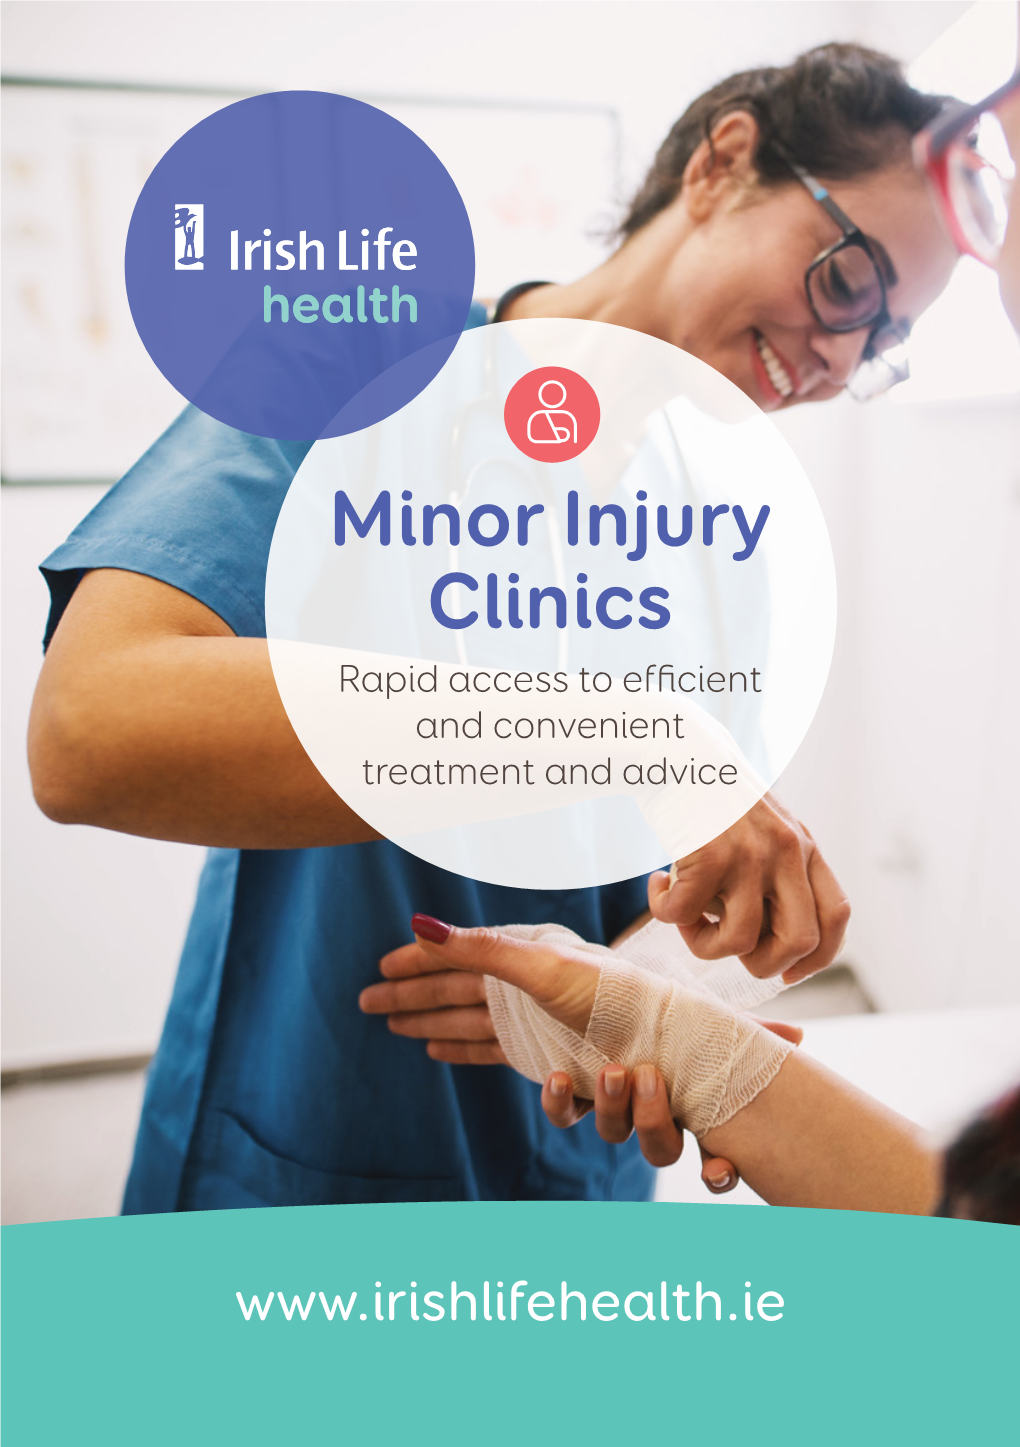 Minor Injury Clinics Rapid Access to Efficient and Convenient Treatment and Advice